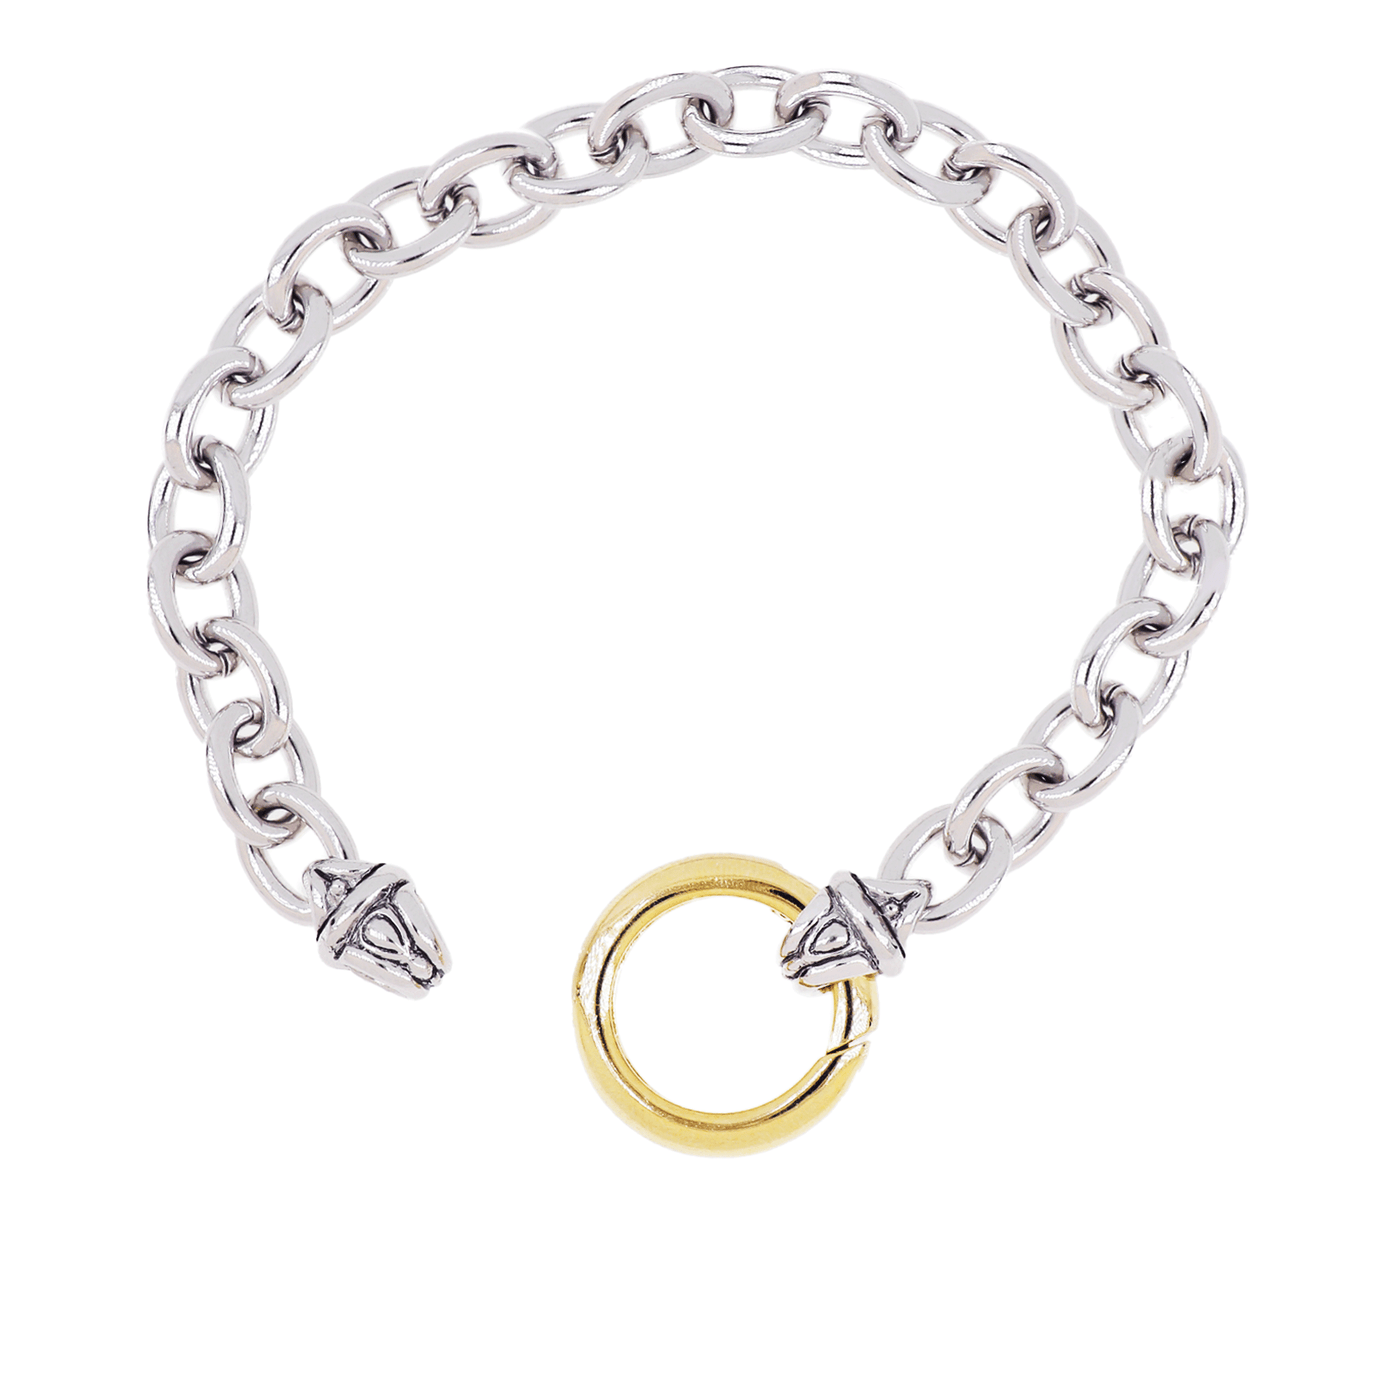 20th Anniversary Collection - Large Link Spring Ring Bracelet